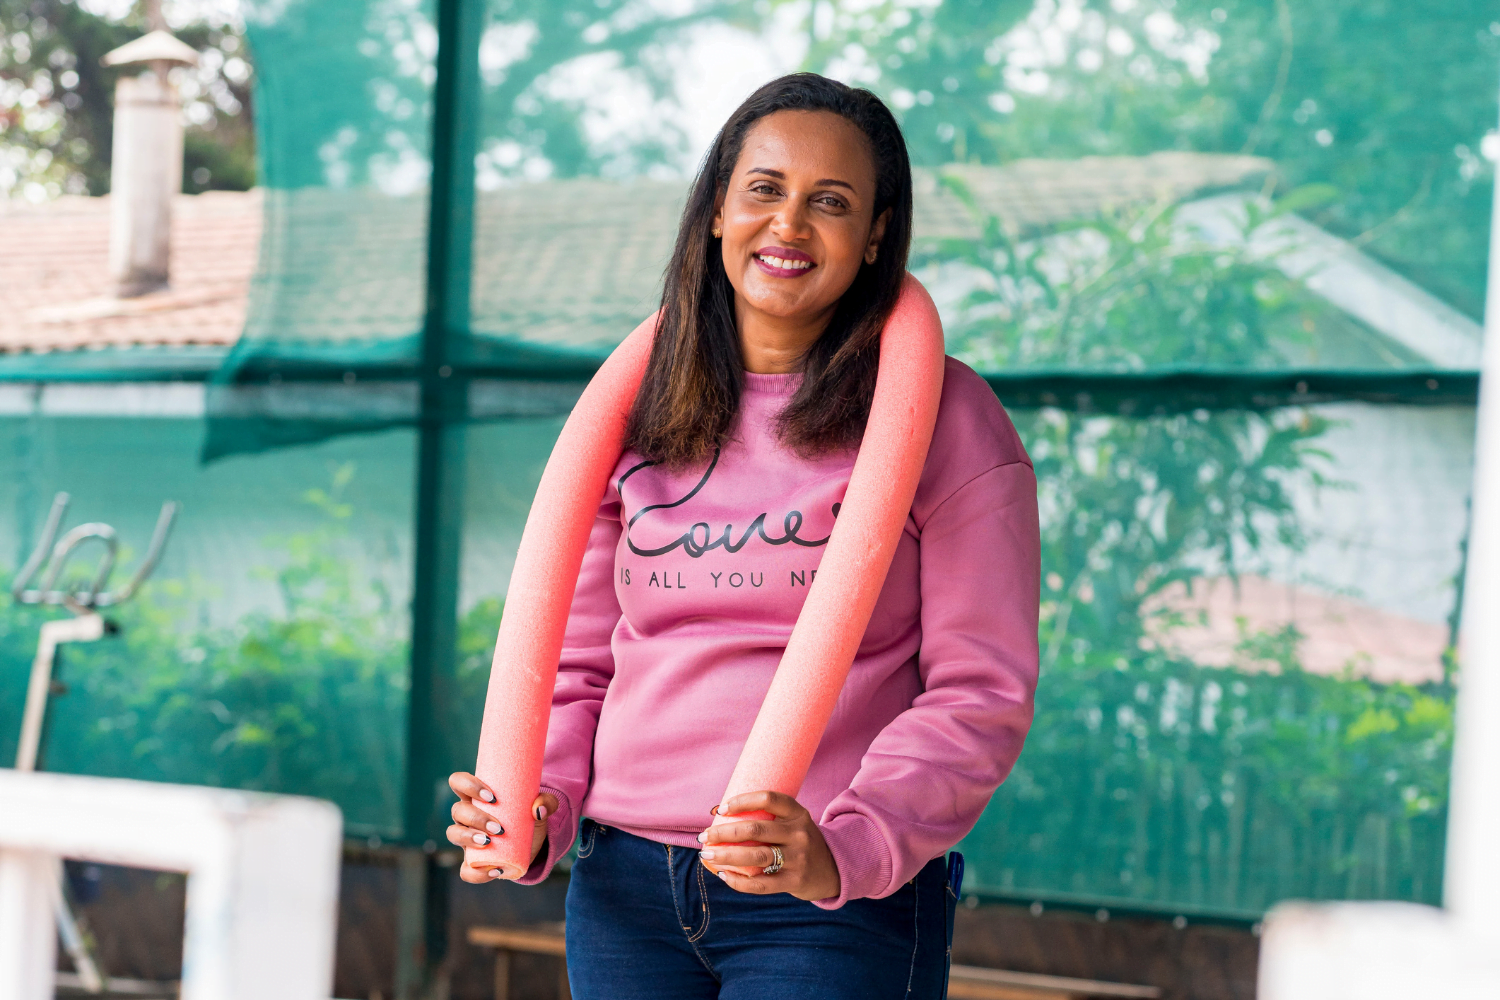 Batty Matharu, a woman entrepreneur from Kenya, stands with a pink pool noodle draped over her shoulders. She is wearing a pink sweatshirt that says "Love" and jeans. Her hair is down and she is smiling. In the background is a pool bench and a green netted wall.